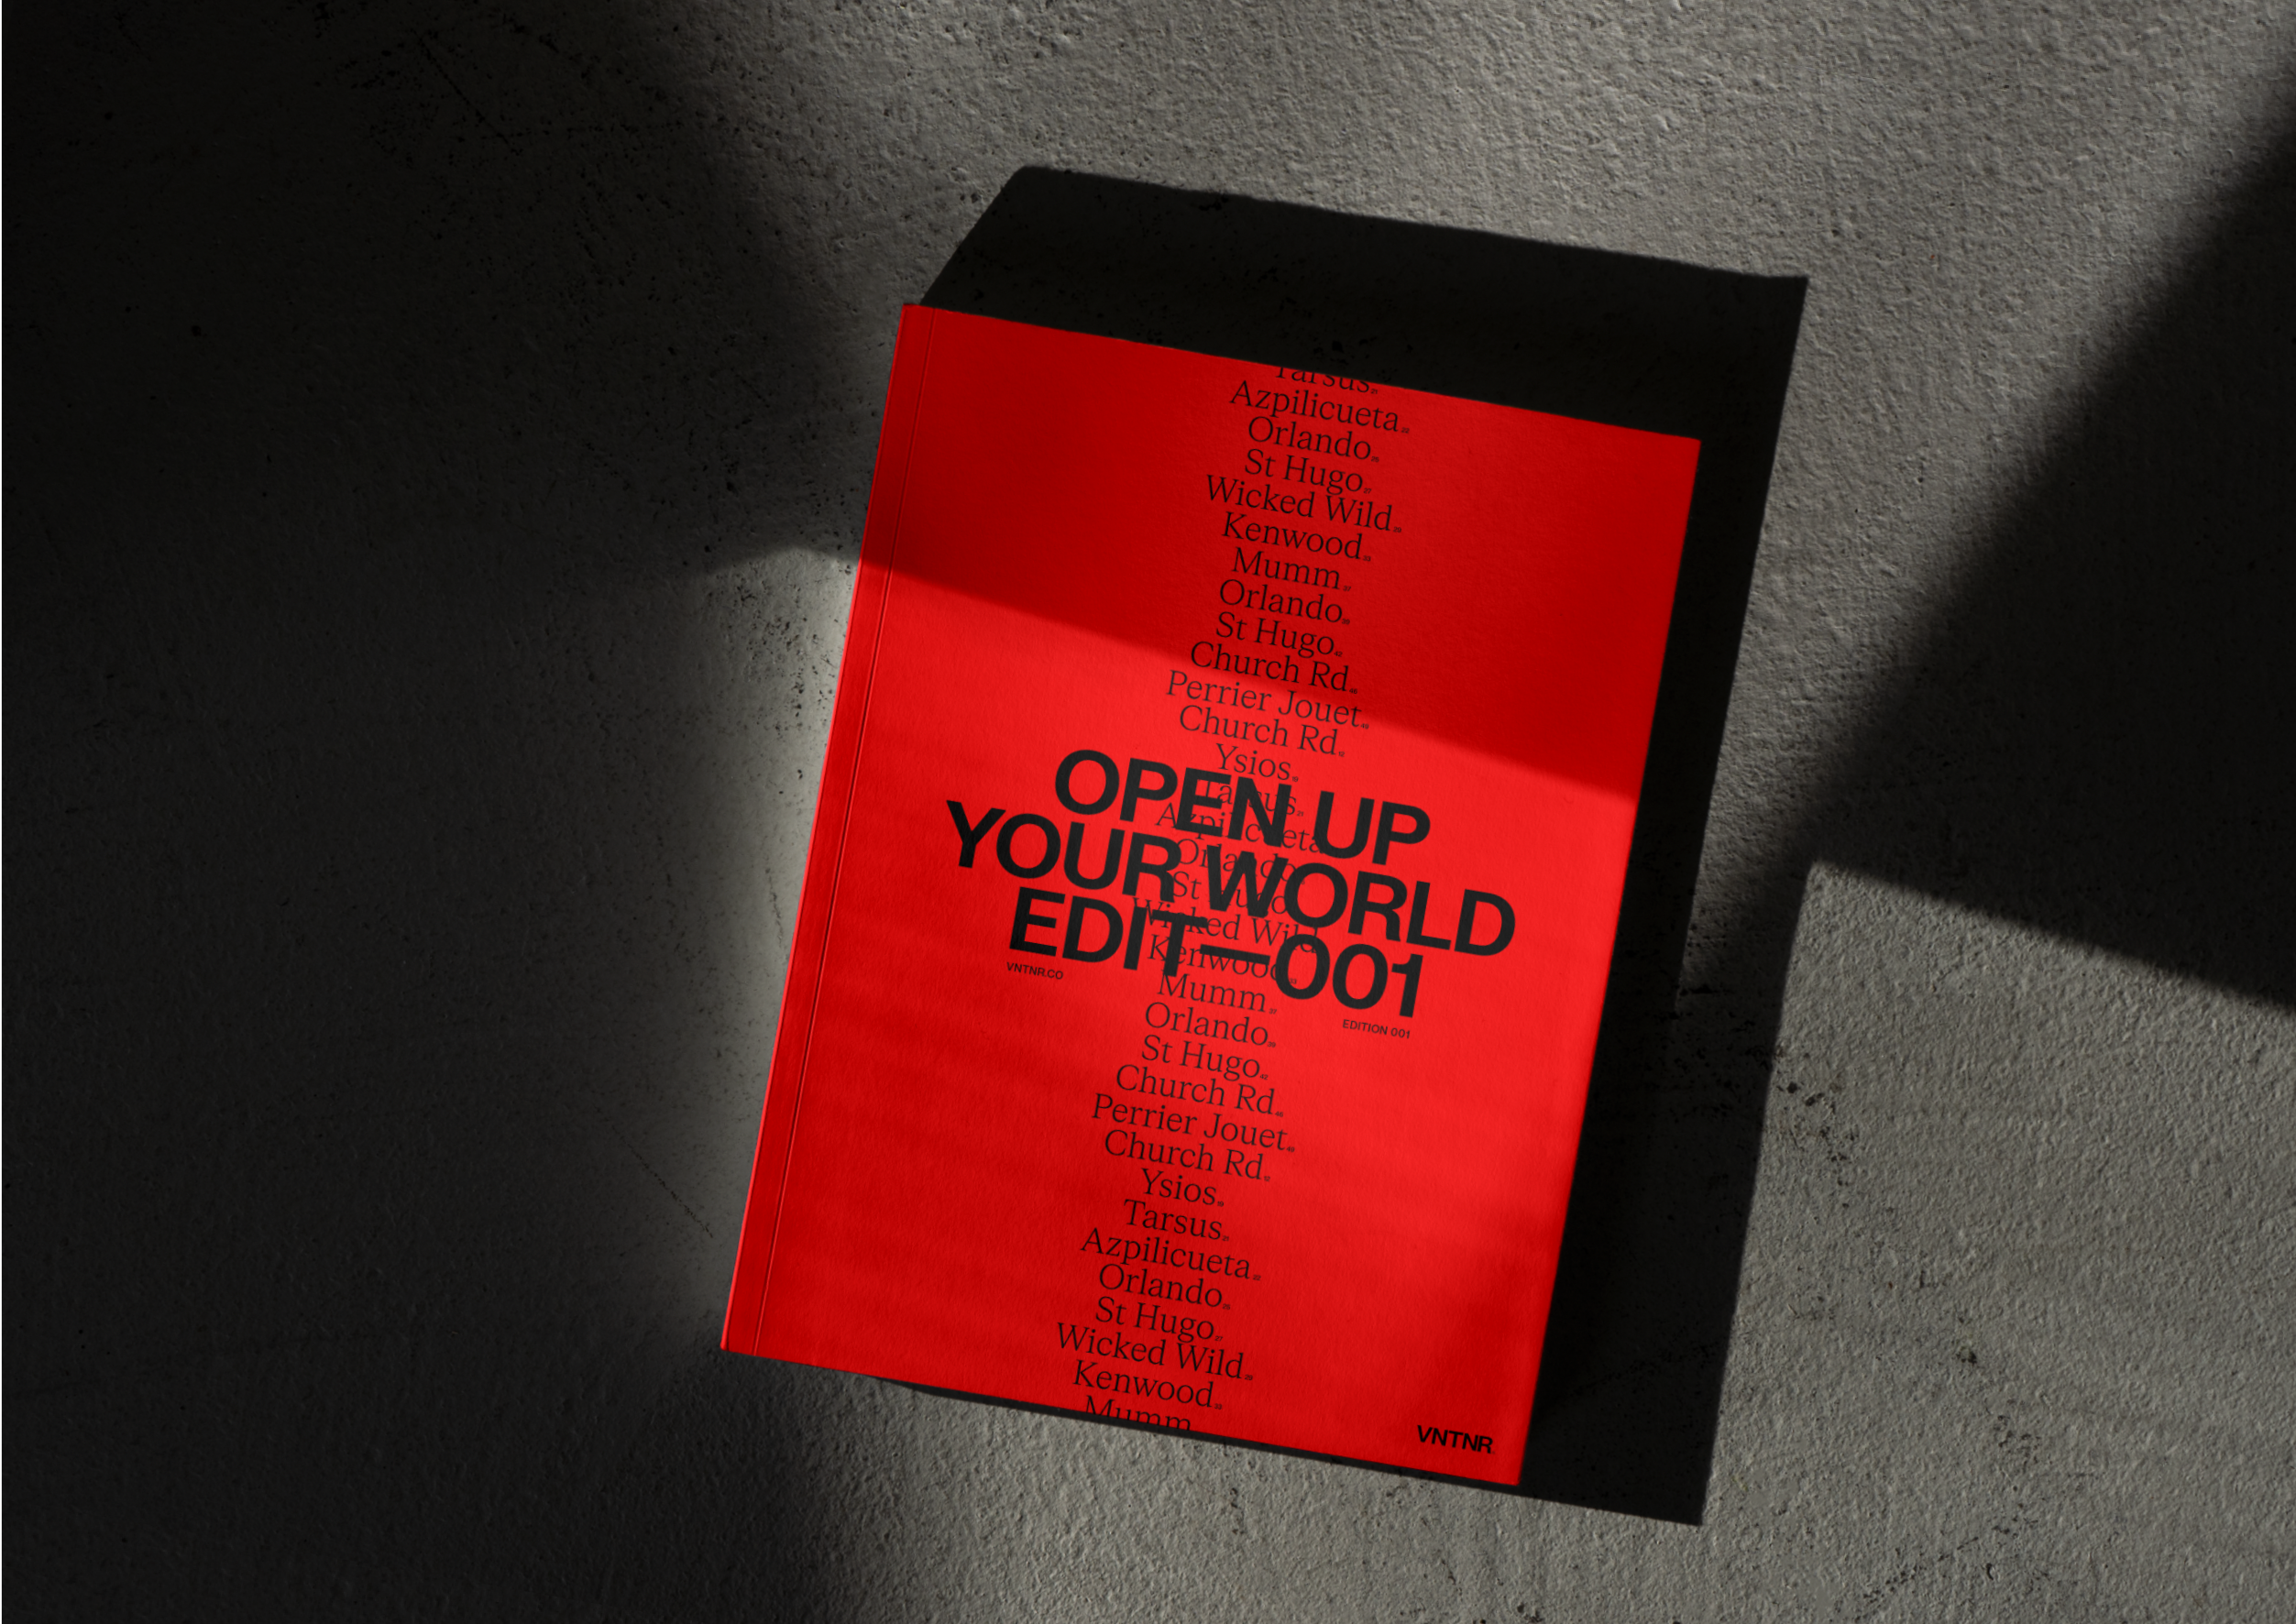 VNTNR branded book with a bright red cover with black text